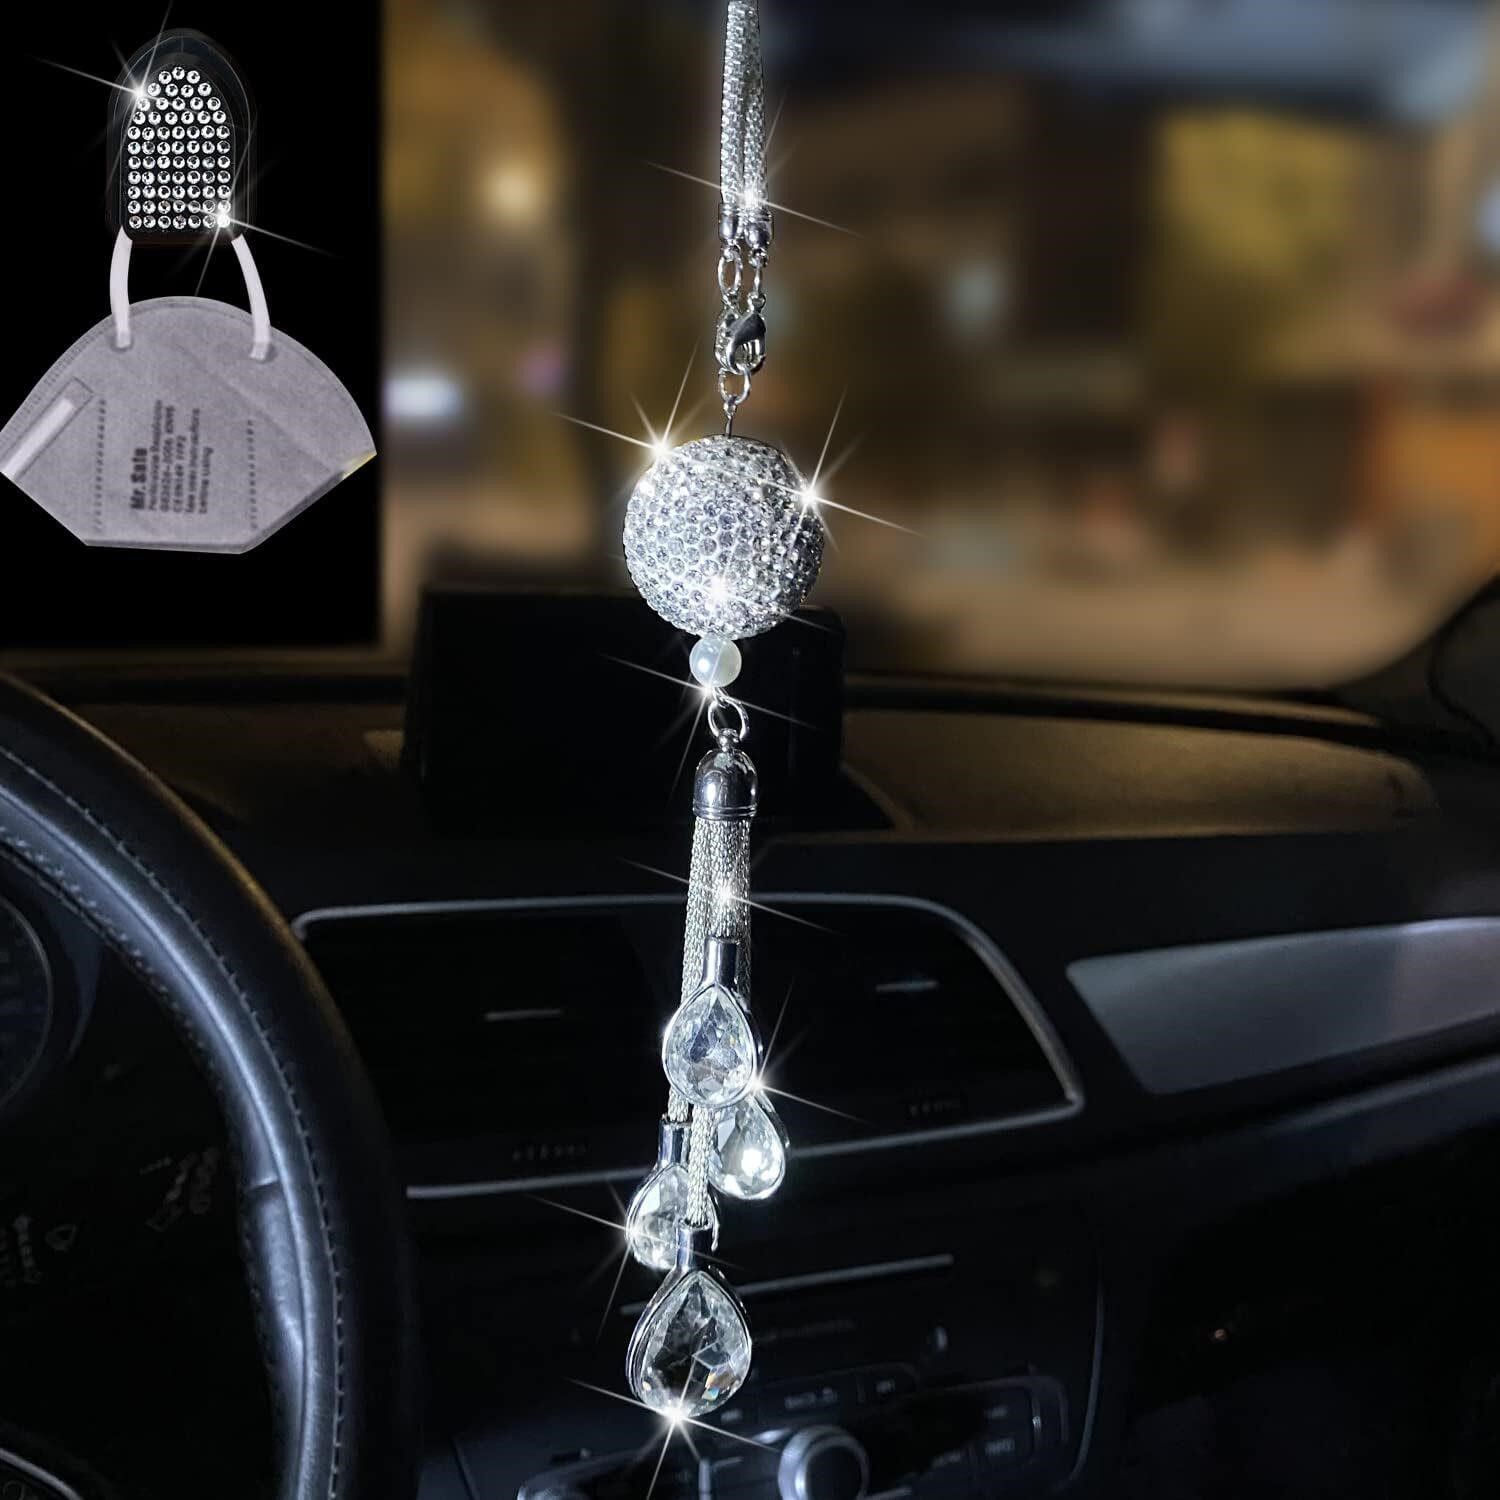 Bling Rearview Mirror Cover for Women (Silver)